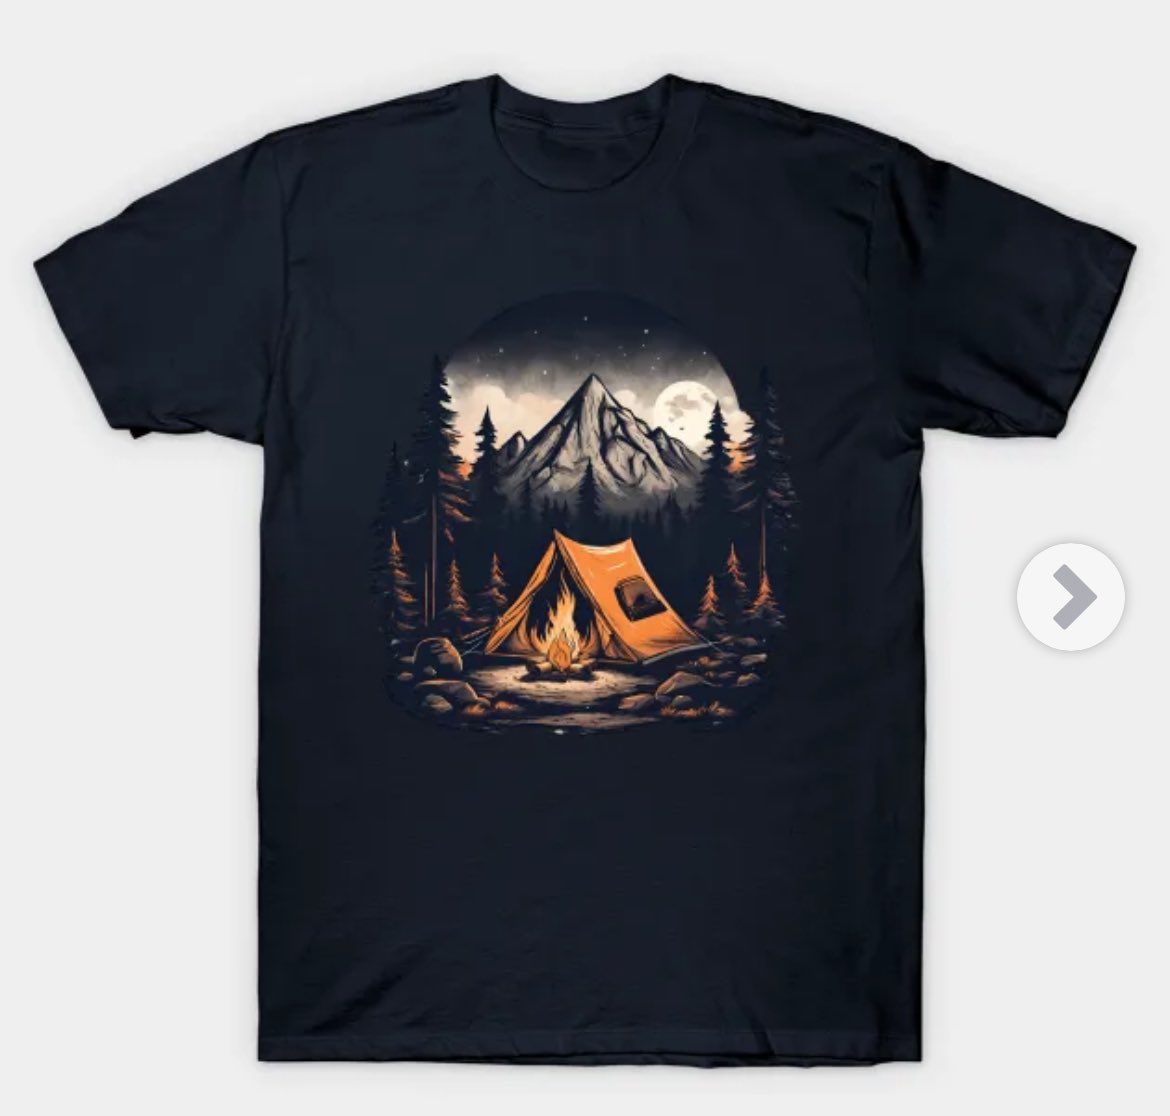 Order Here👉 teepublic.com/t-shirt/544580…

#camping #campinglife #nature #campinglovers #aesthetic #campingtent #tent #wilderness #intothewild #outdoors #mountain #nightsky #AdventureAwaits #gifts #campfire #rocks